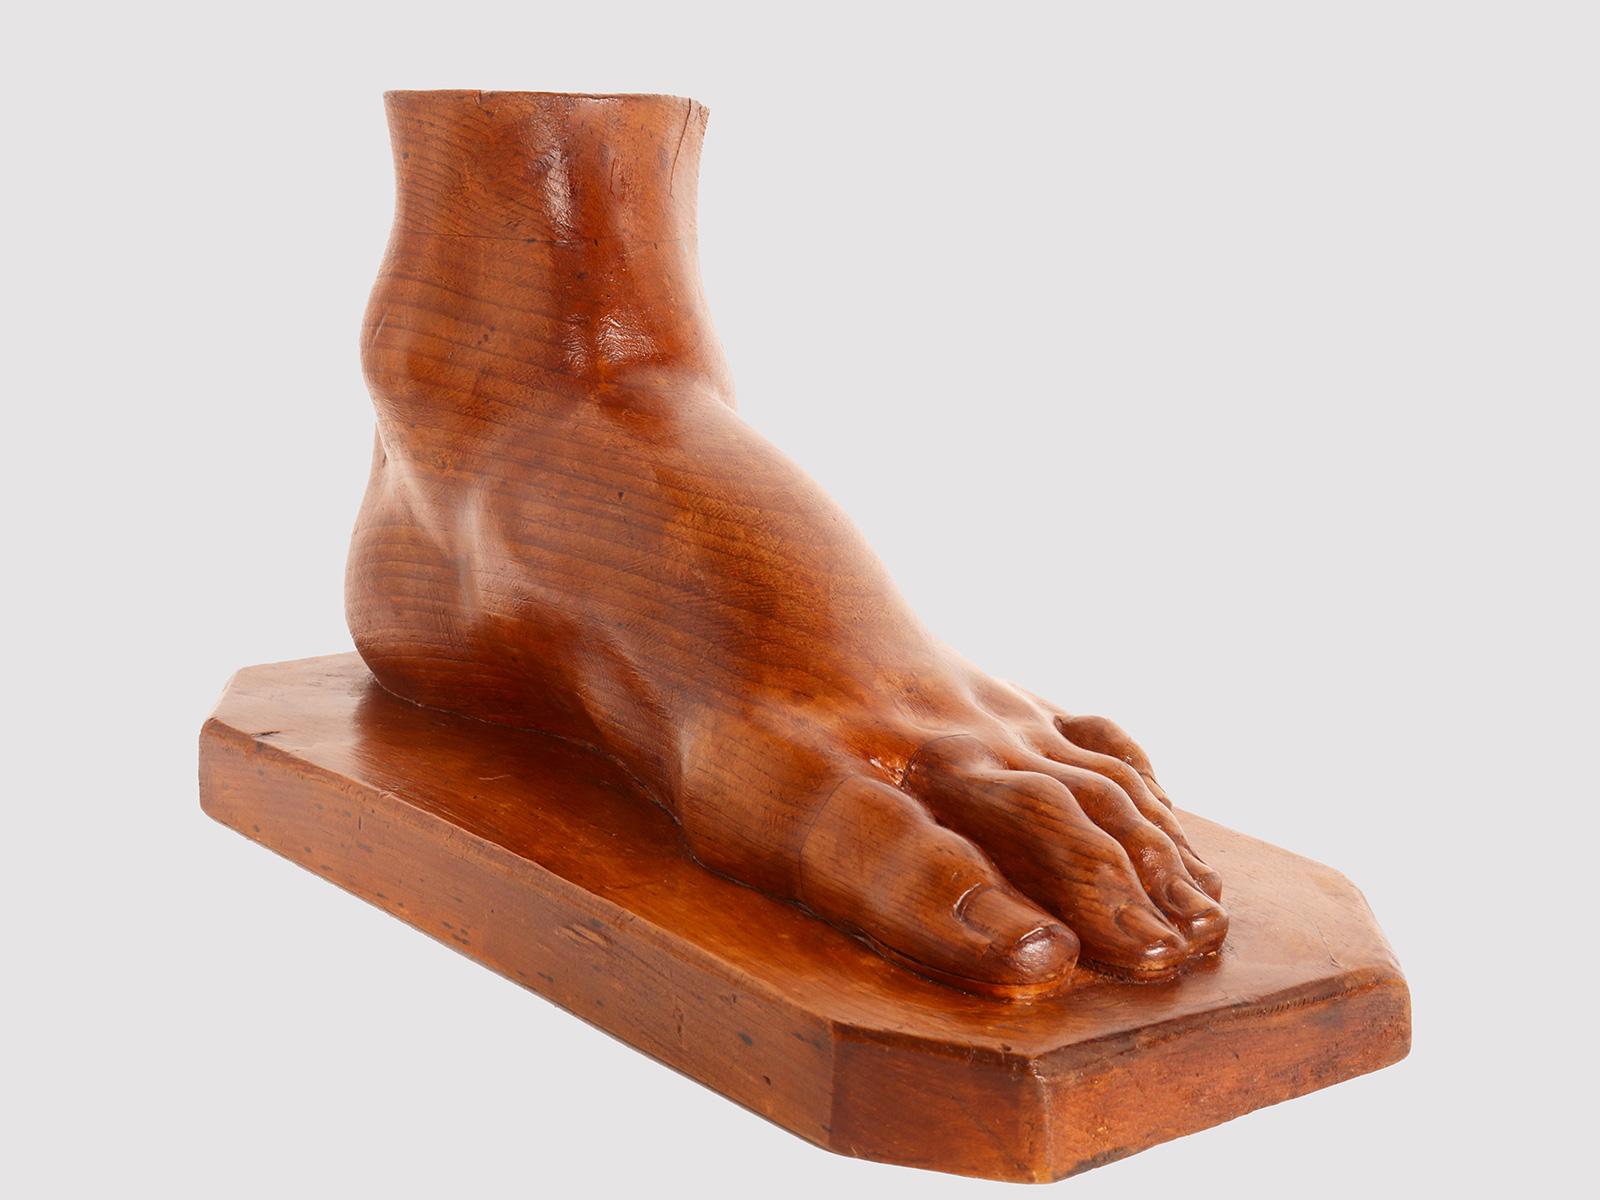 Artistic atelier sculpture depicting a foot. Made of fruit wood, the sculpture has a smooth base with an irregular geometric edge, on which is the artist's proof of refined workmanship and realism, finished down to the smallest detail. Not like in